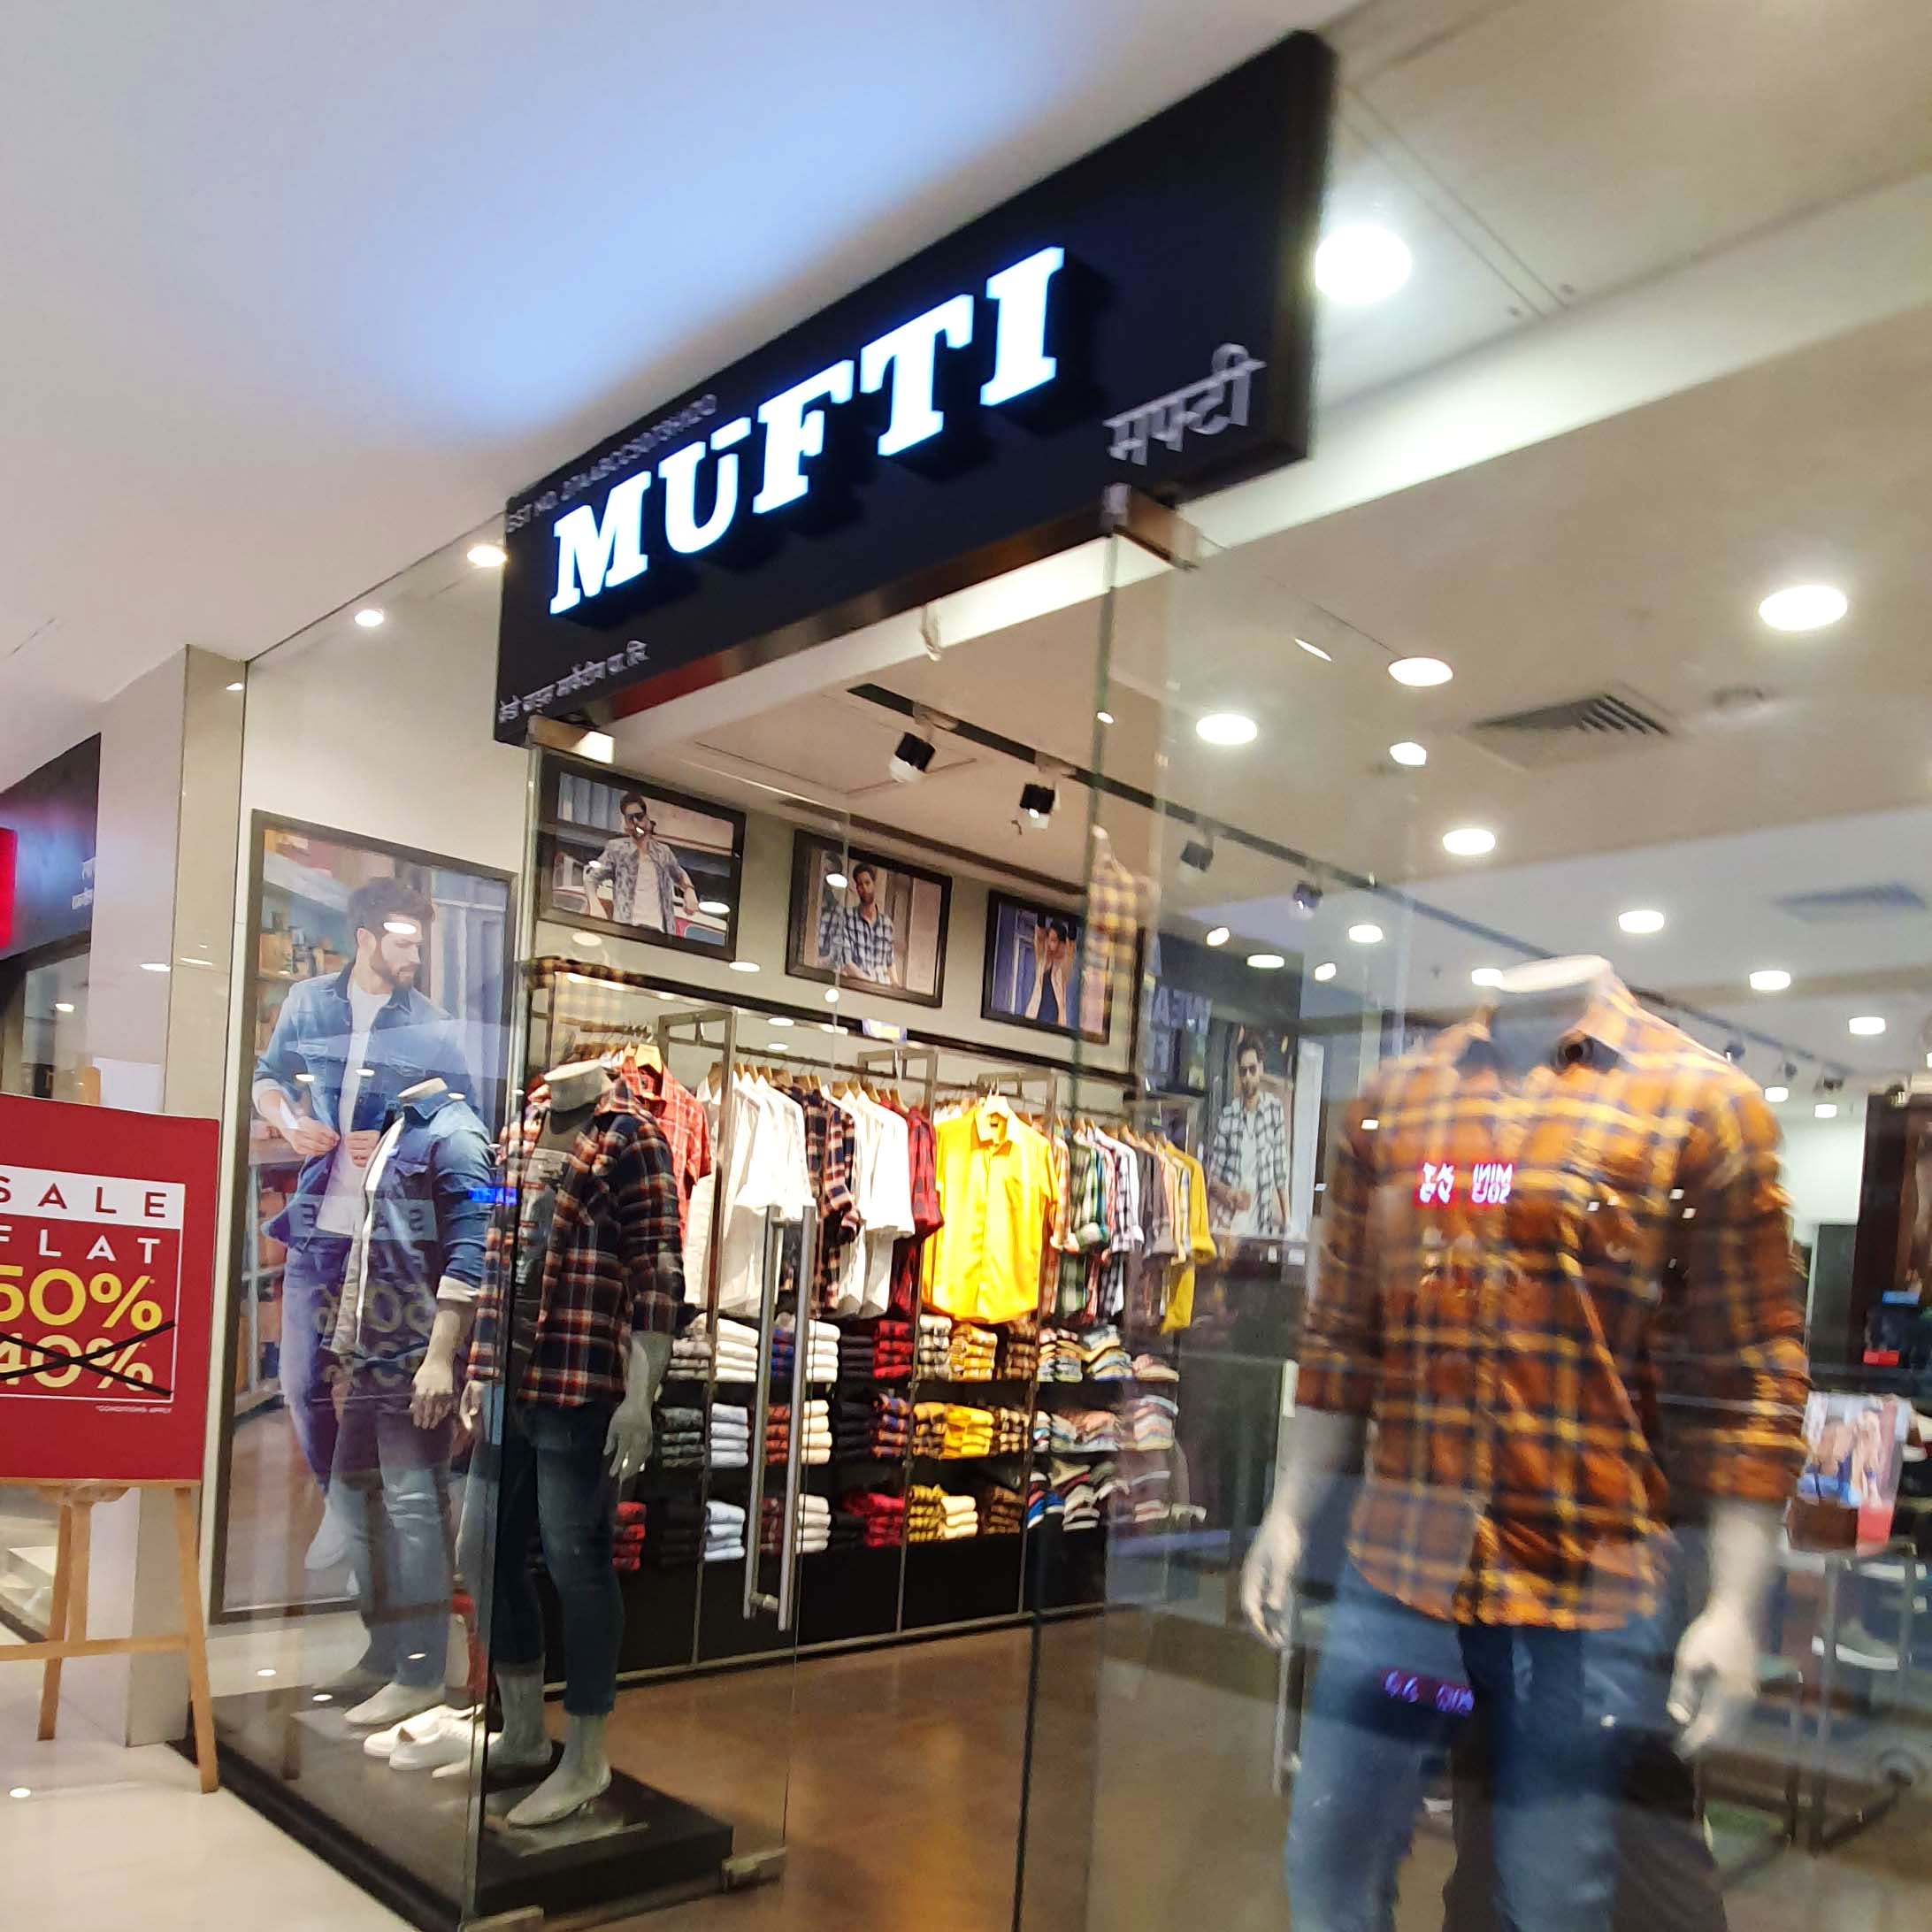 Outlet store,Product,Building,Retail,Footwear,Shopping mall,Boutique,Sportswear,Shopping,Shoe